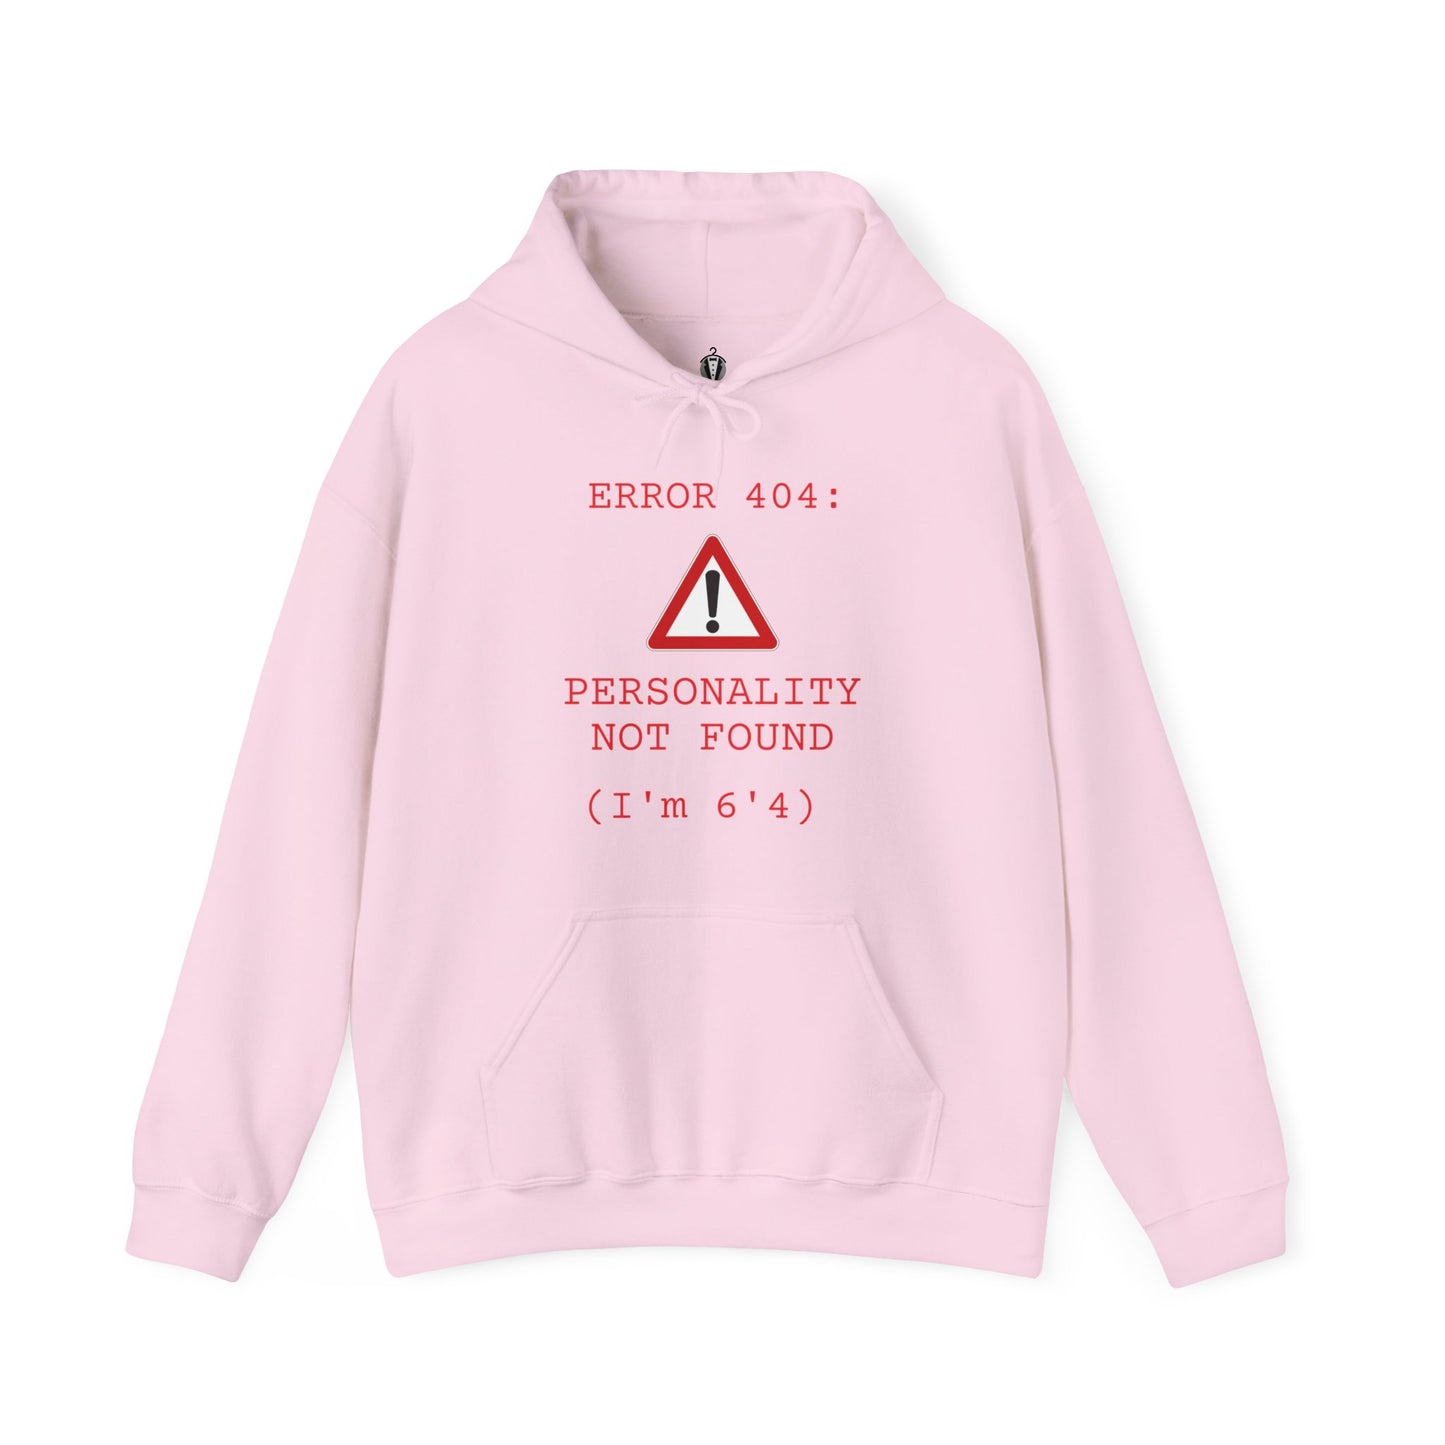 "ERROR 404: PERSONALITY NOT FOUND" - HOODIE